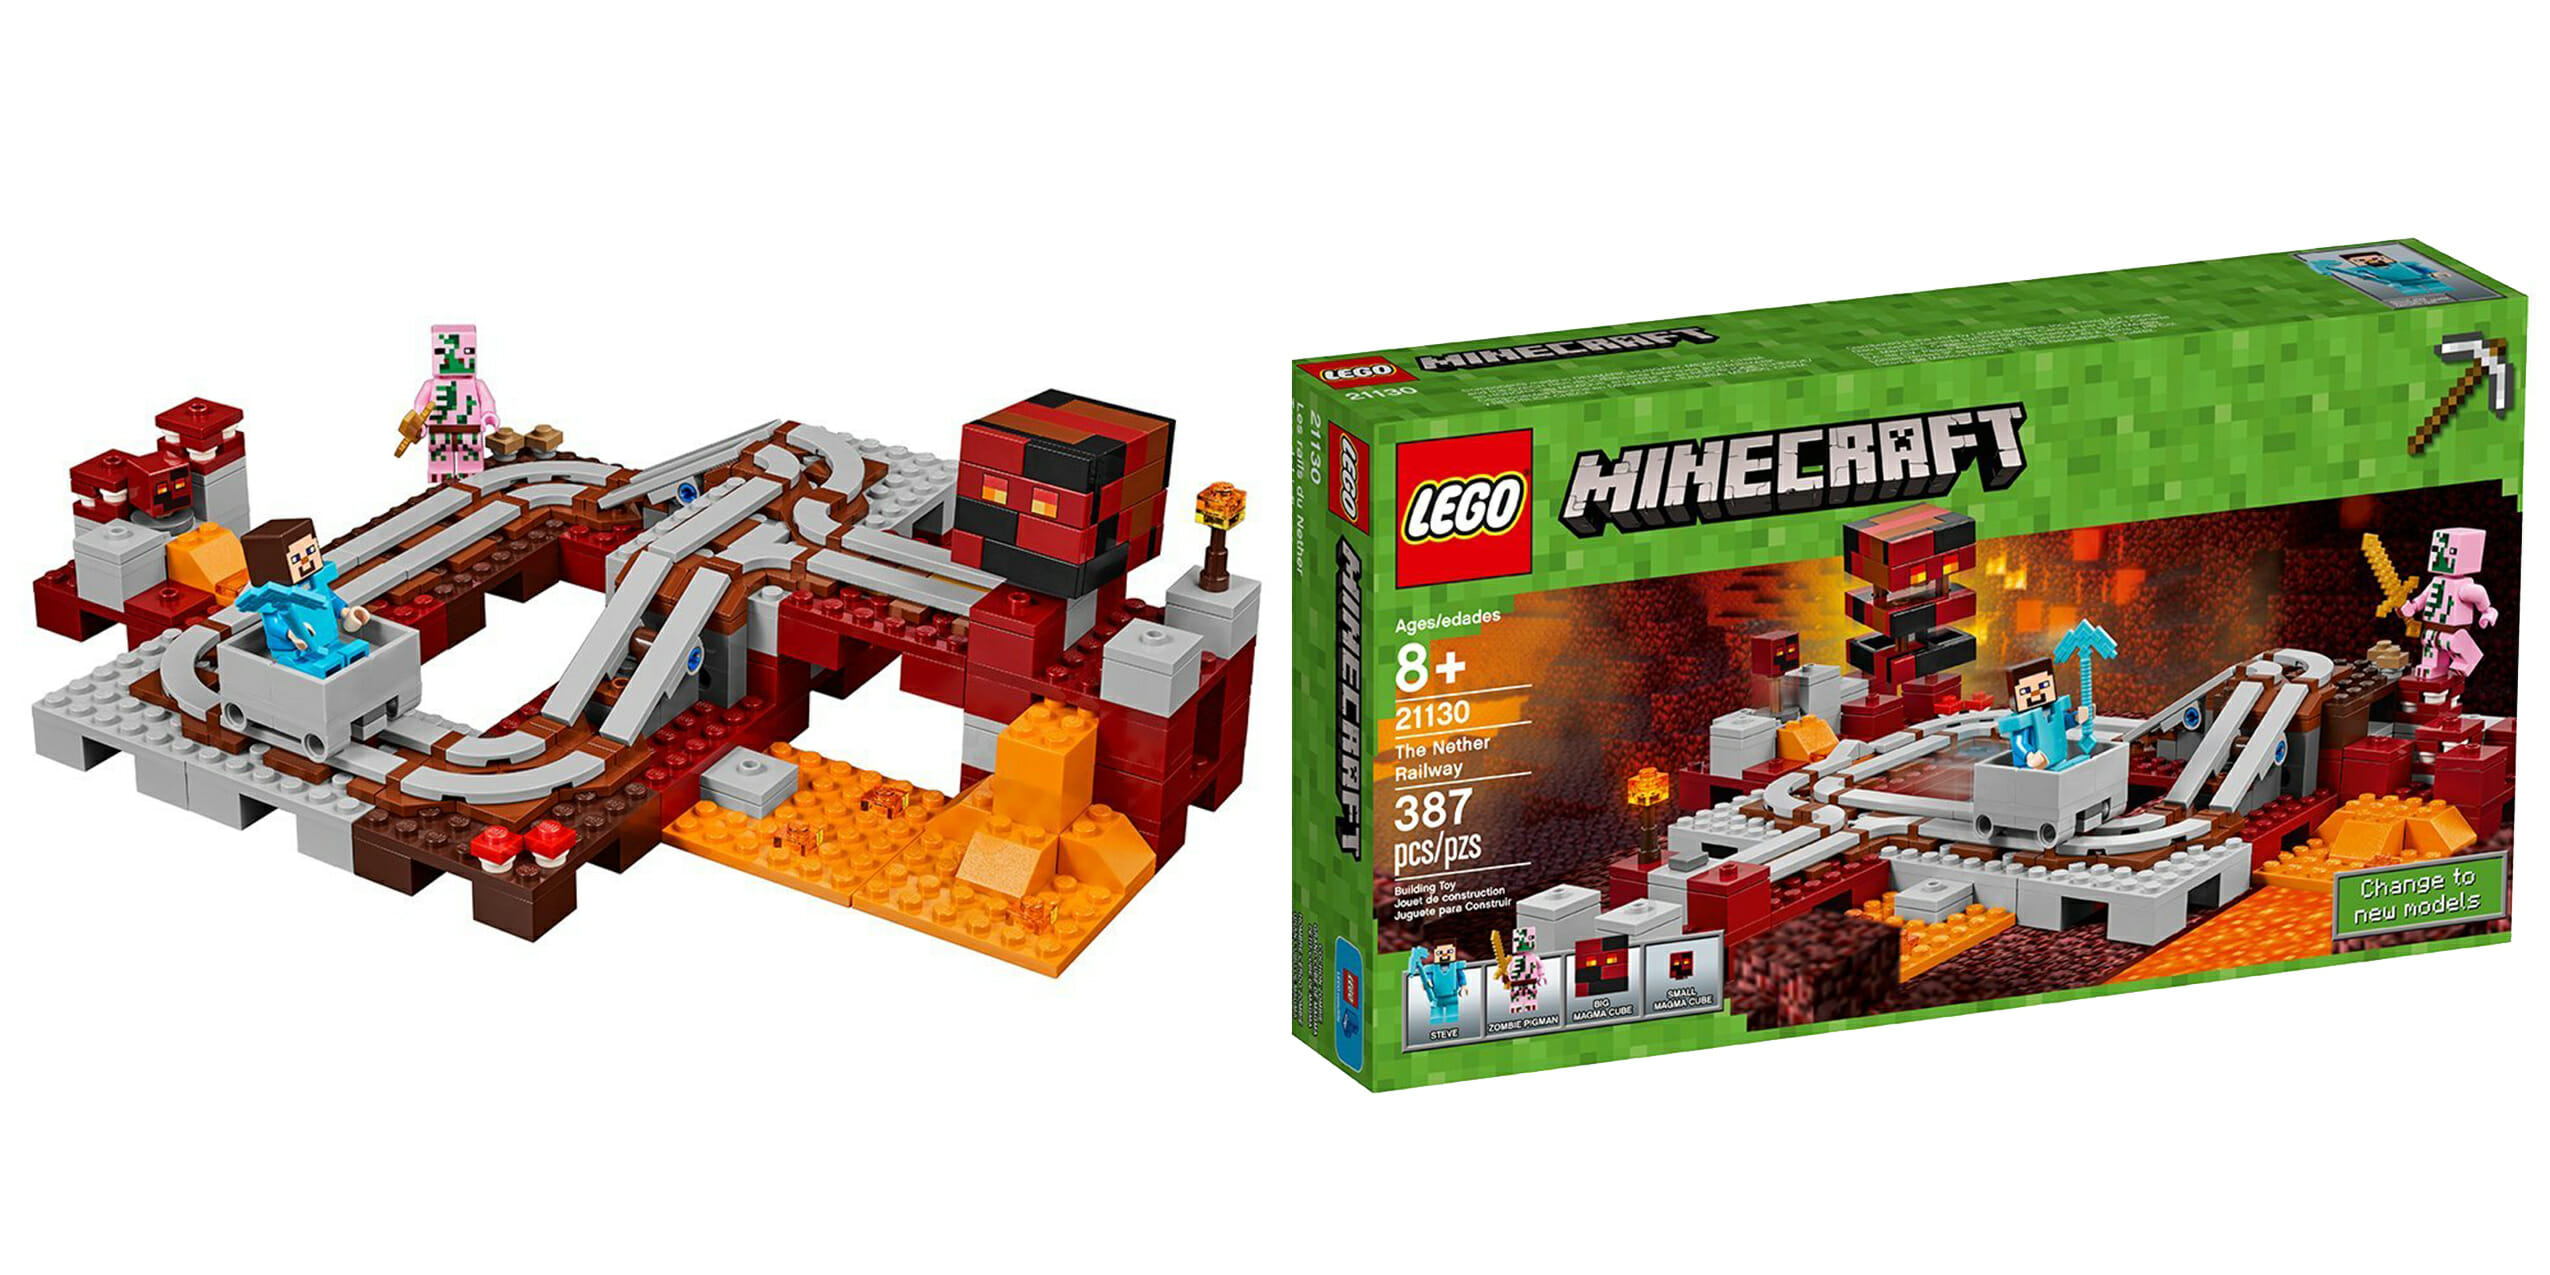 Hunt Creepers, dig for diamonds and build anything with Minecraft Lego